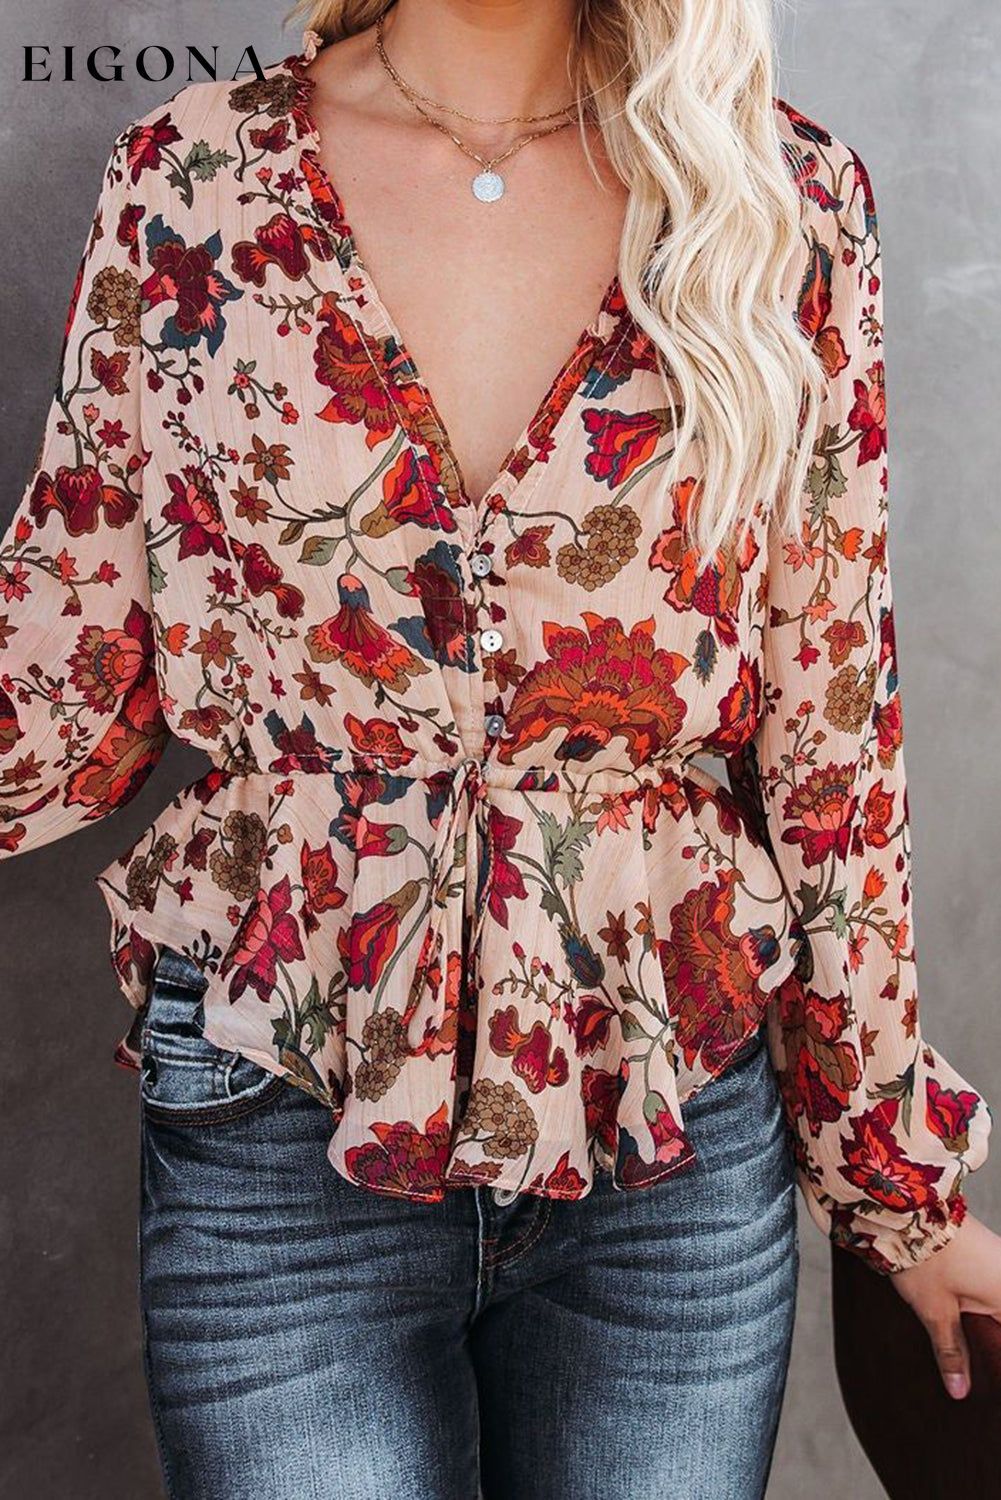 Multicolour Floral Frilled V Neck Drawstring Peplum Blouse clothes long sleeve shirt long sleeve shirts long sleeve top long sleeve tops shirt shirts top tops